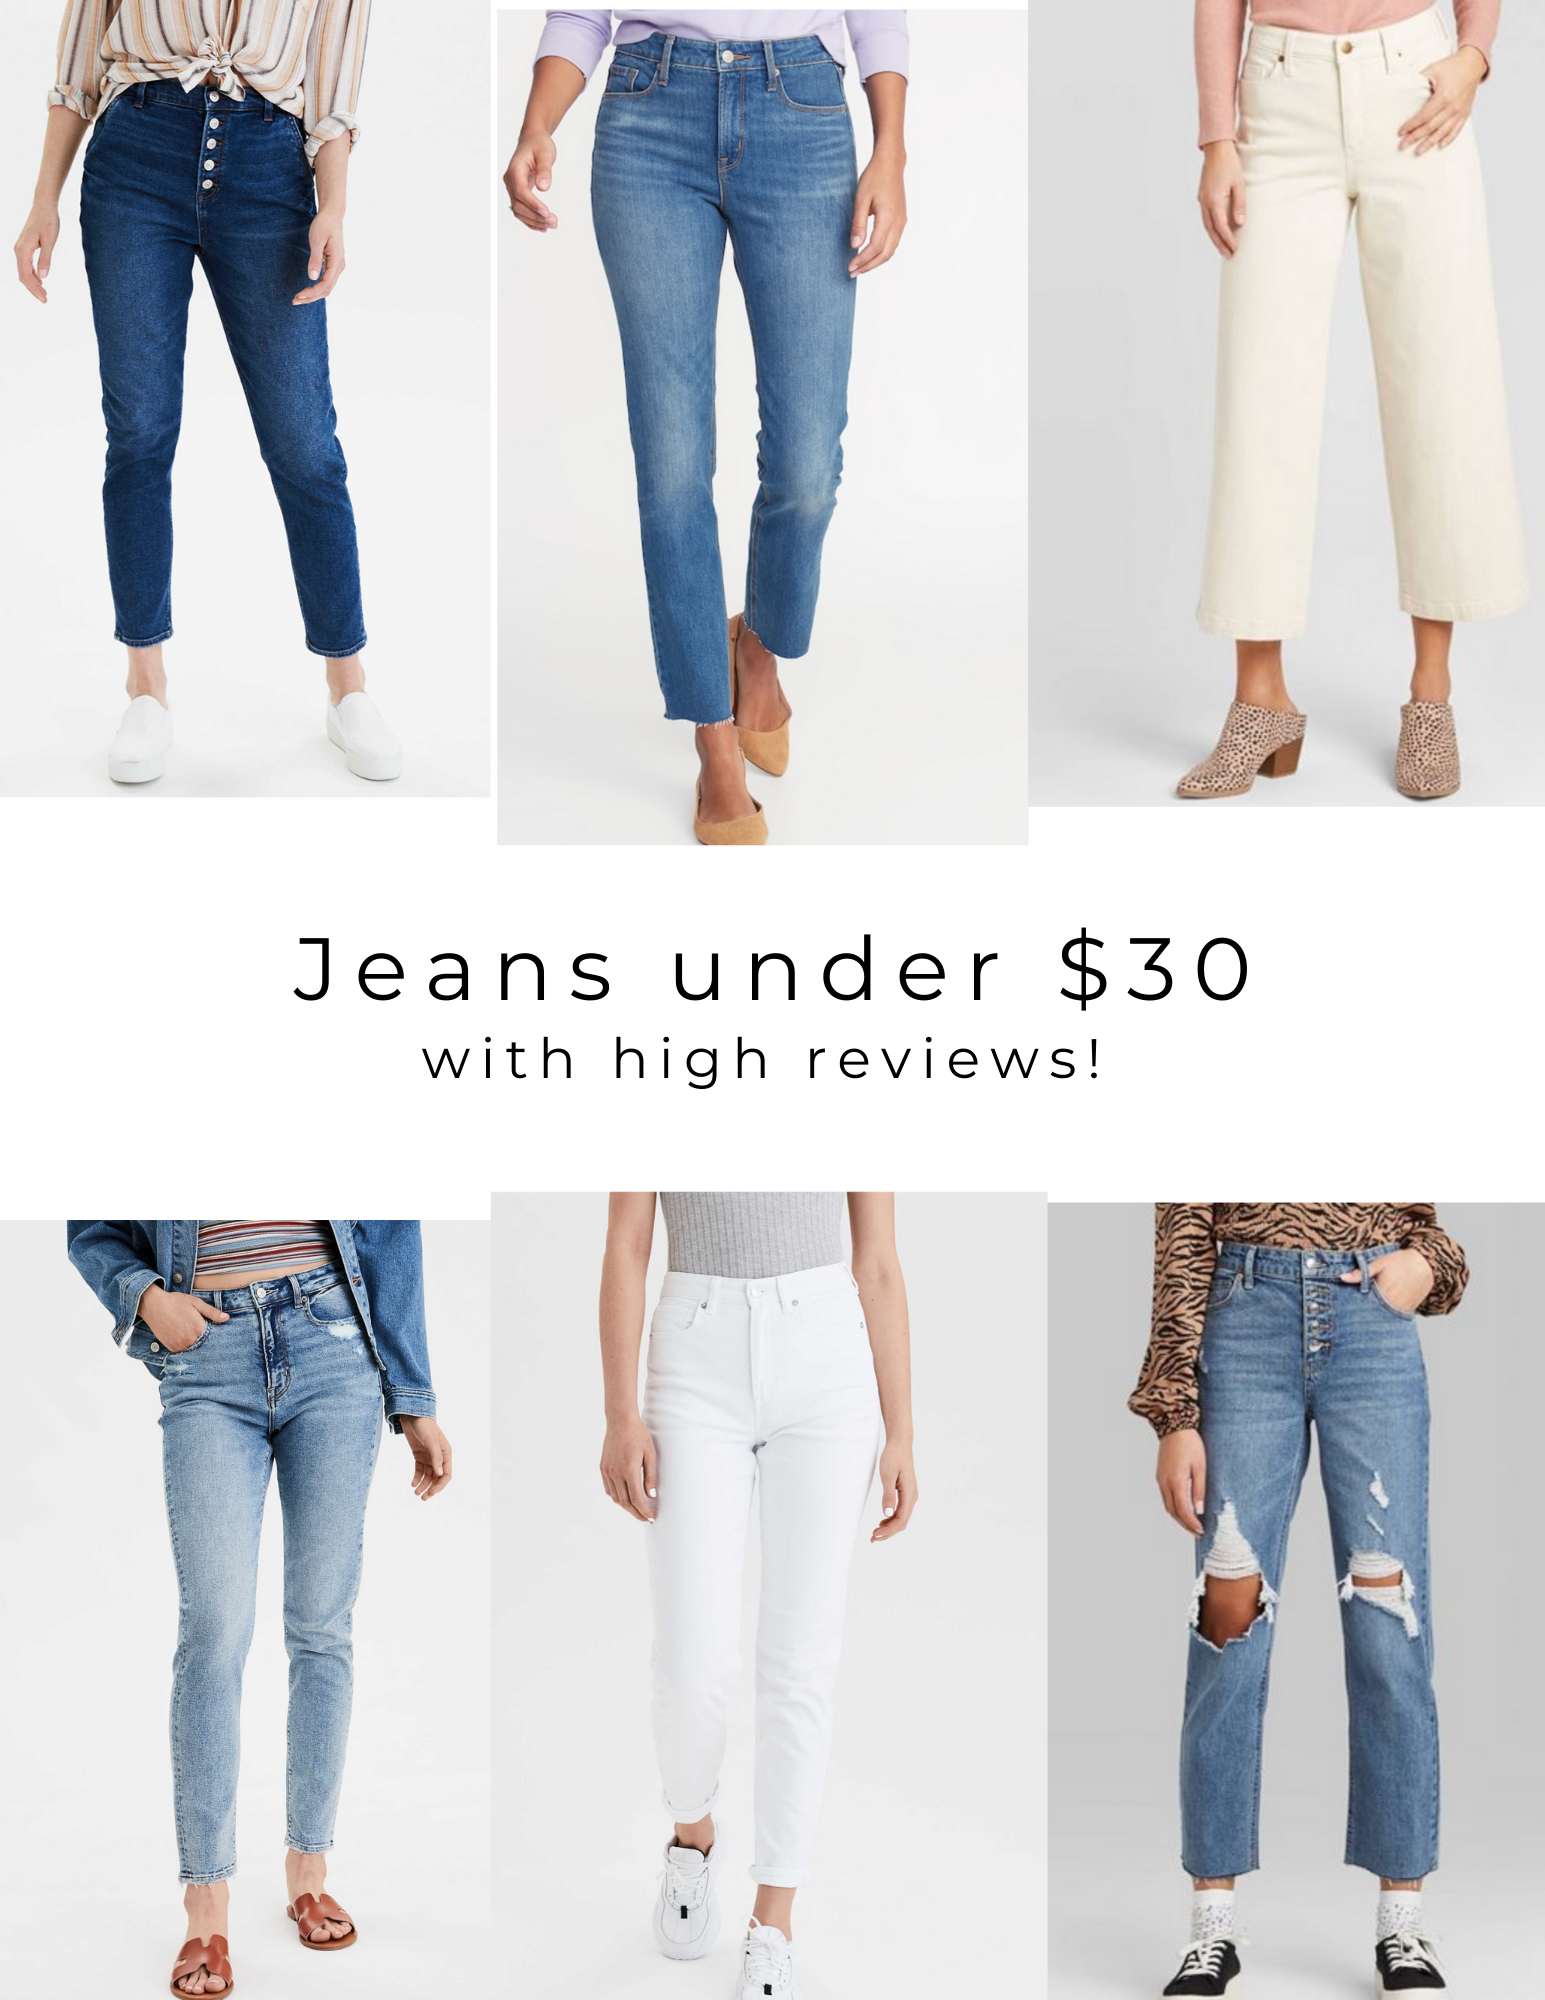 Jeans Under $30 with High Reviews!